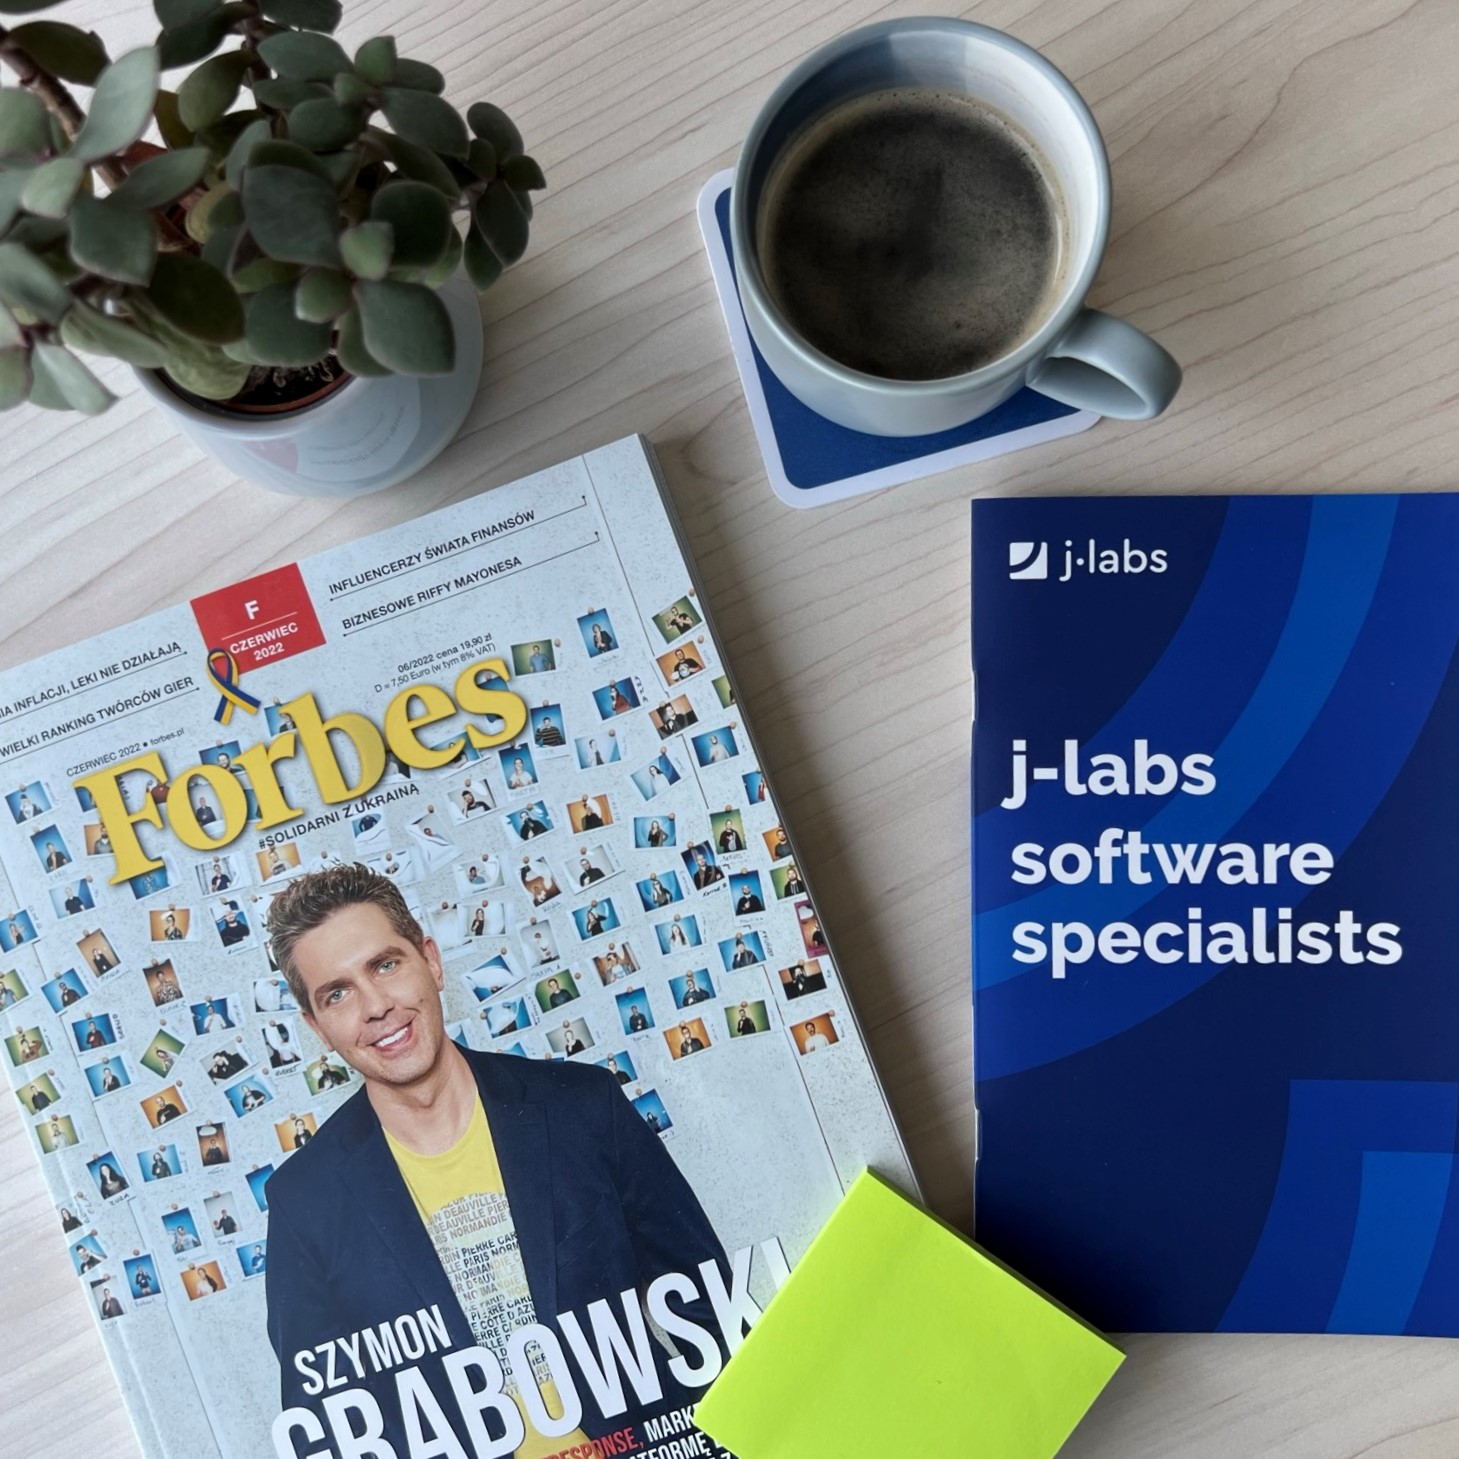 Forbes & j-labs